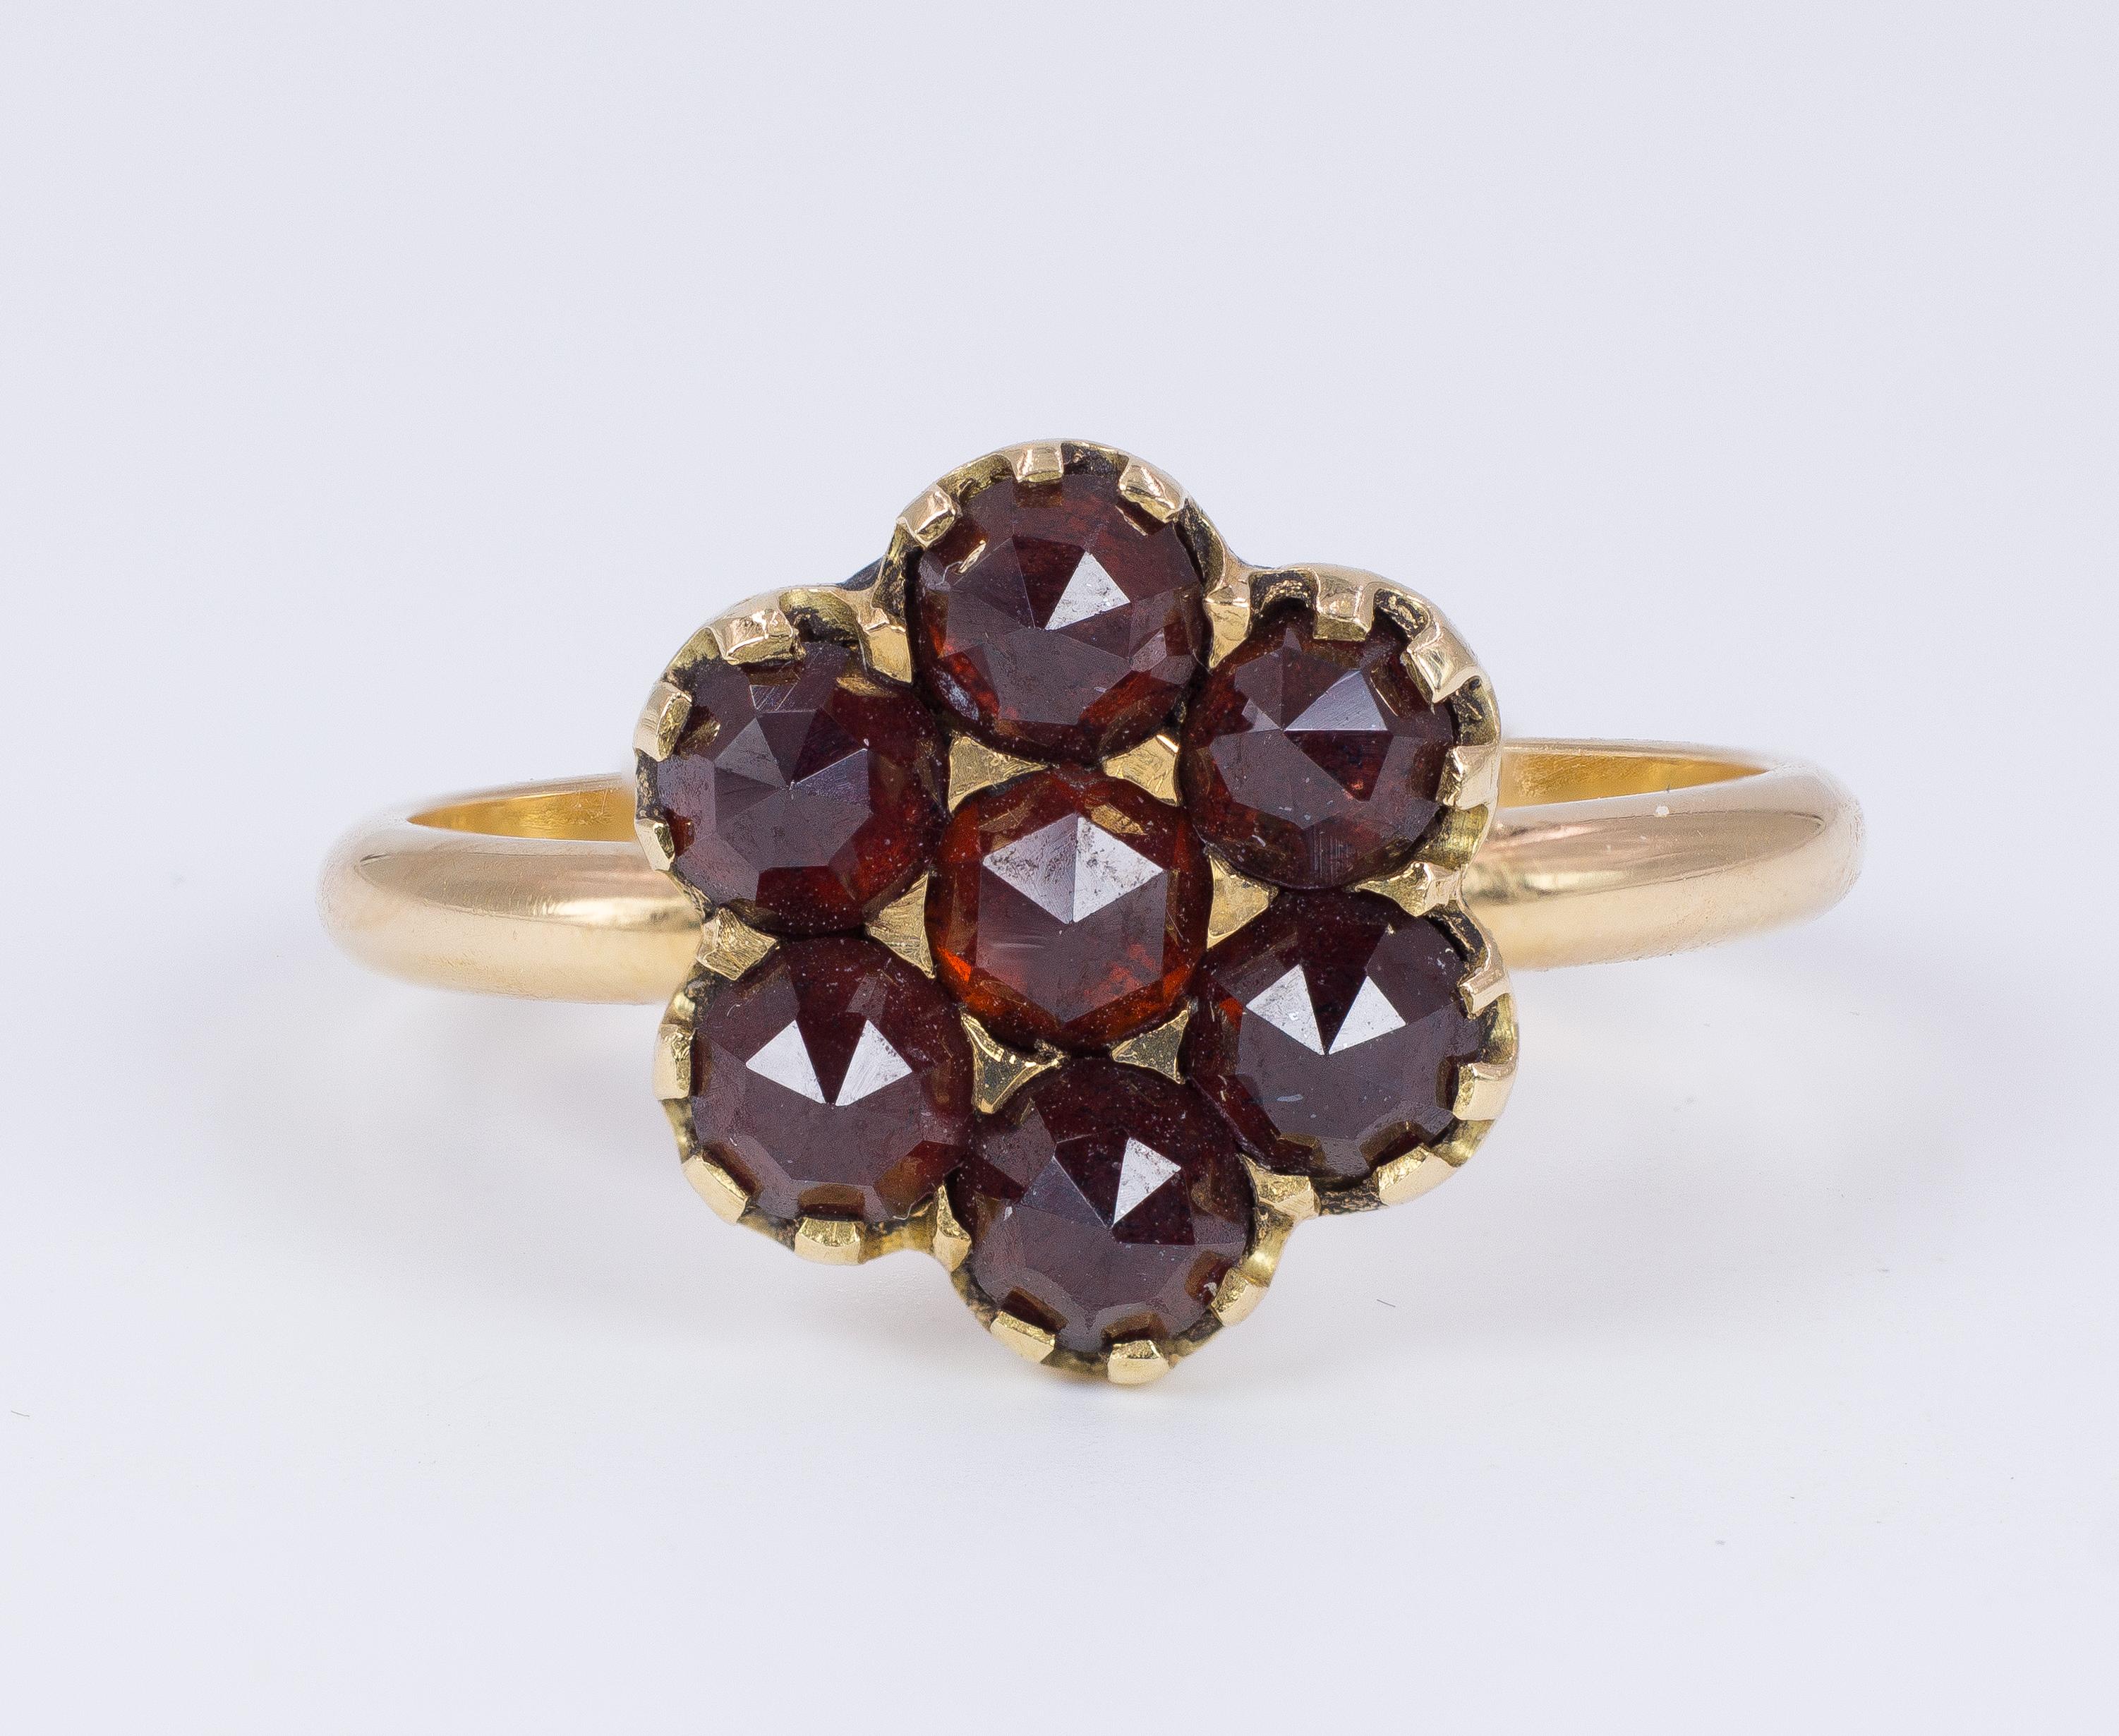 This fine but elegant vintage ring, dating from the 1950s, features a lovely flower shape, where the petals and the centre are six dark red garnets.
The ring is modelled in 18K gold throughout. 

MATERIALS
18K gold and garnets

RING SIZE
7 US